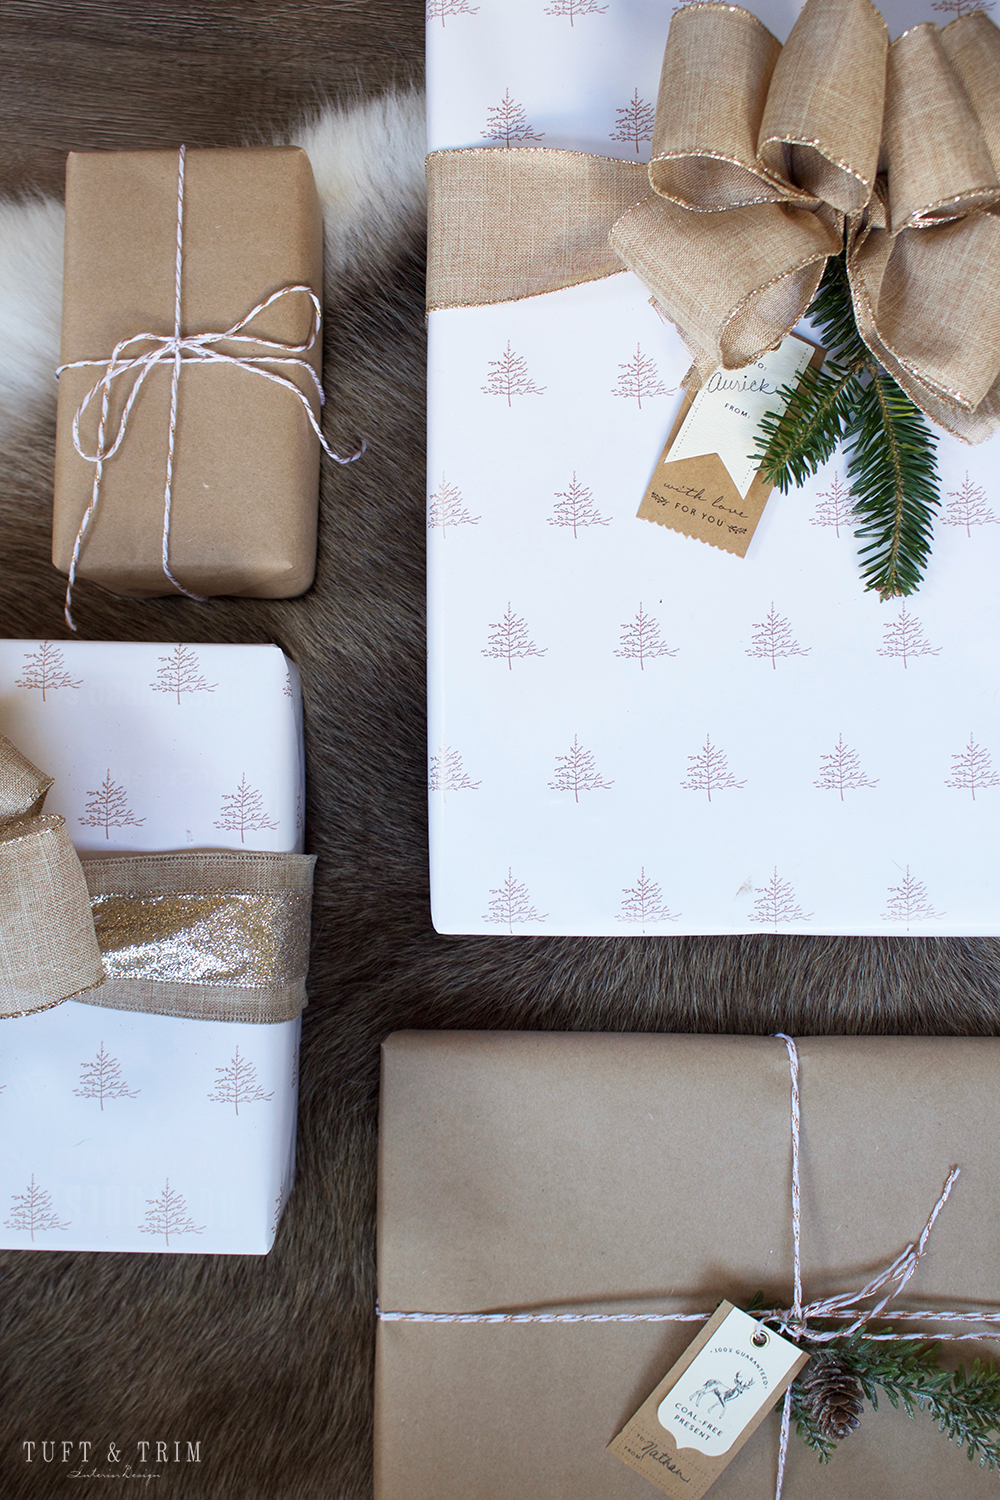 Champagne and Linen Christmas Gift Wrap. Get wrapping ideas at tuftandtrim.com!